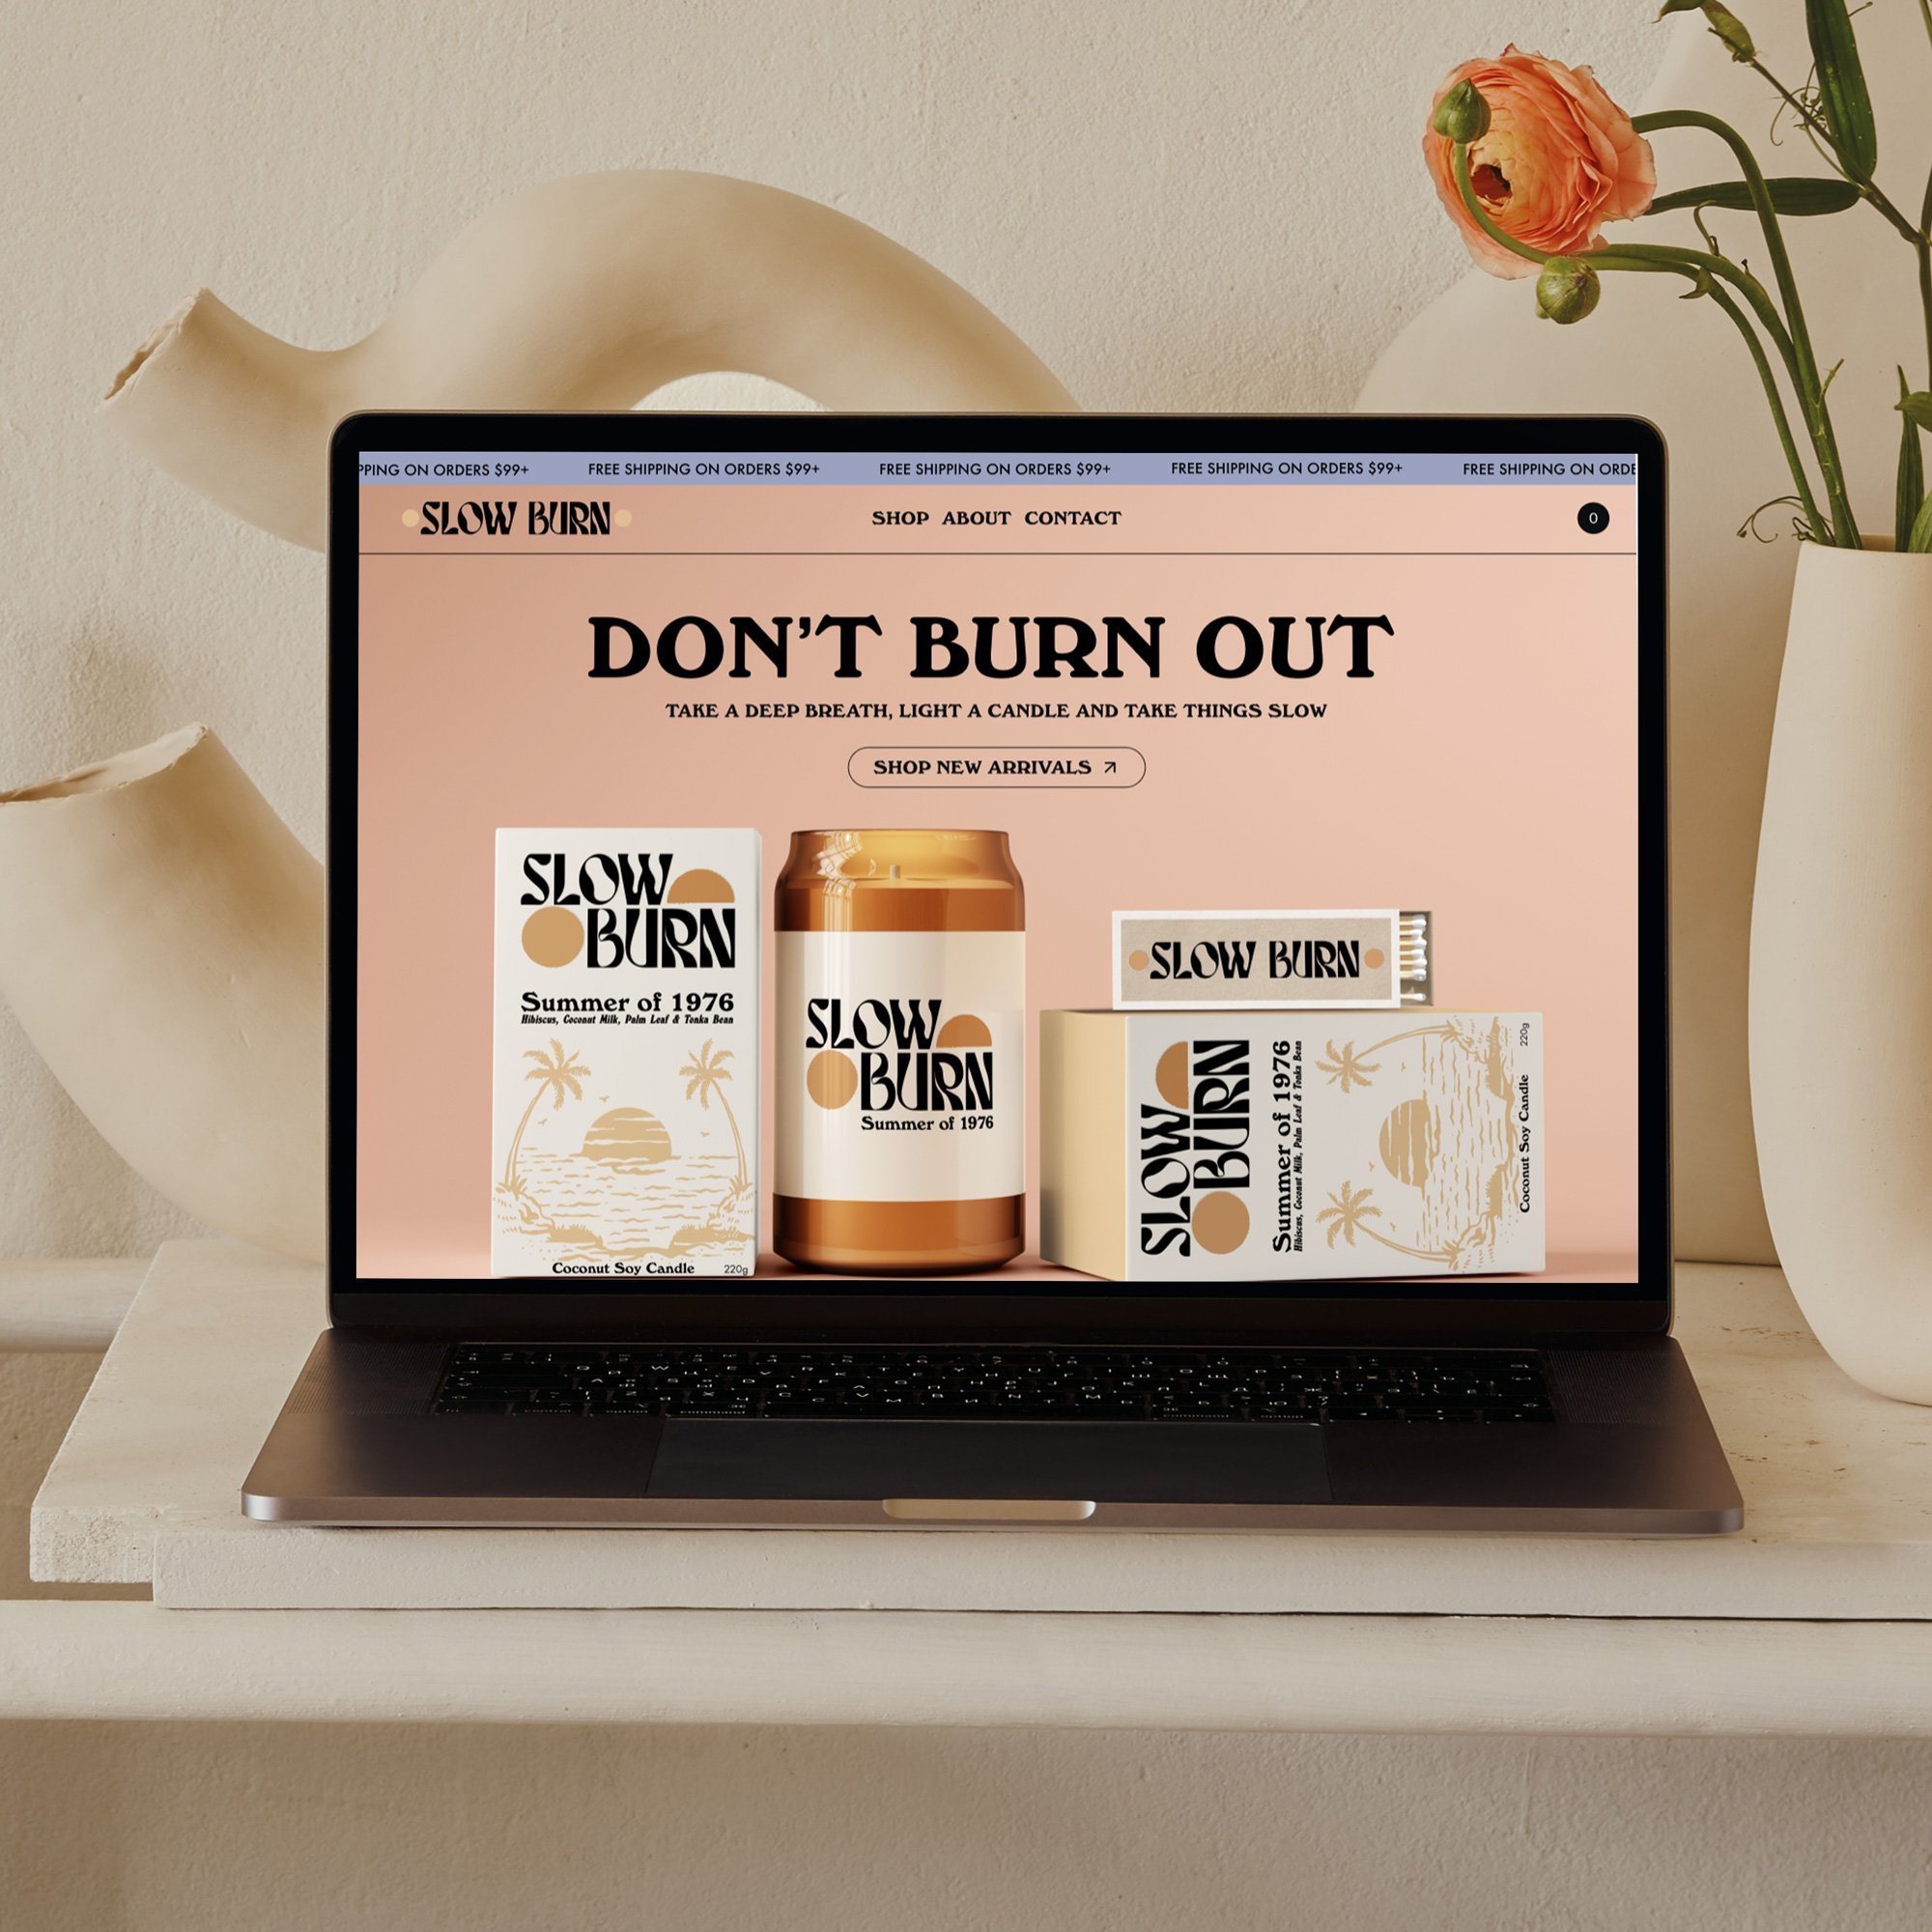 Slow-Burn-Candles-Website-by-Toasted-Coconut-Creative-Newcastle.jpg